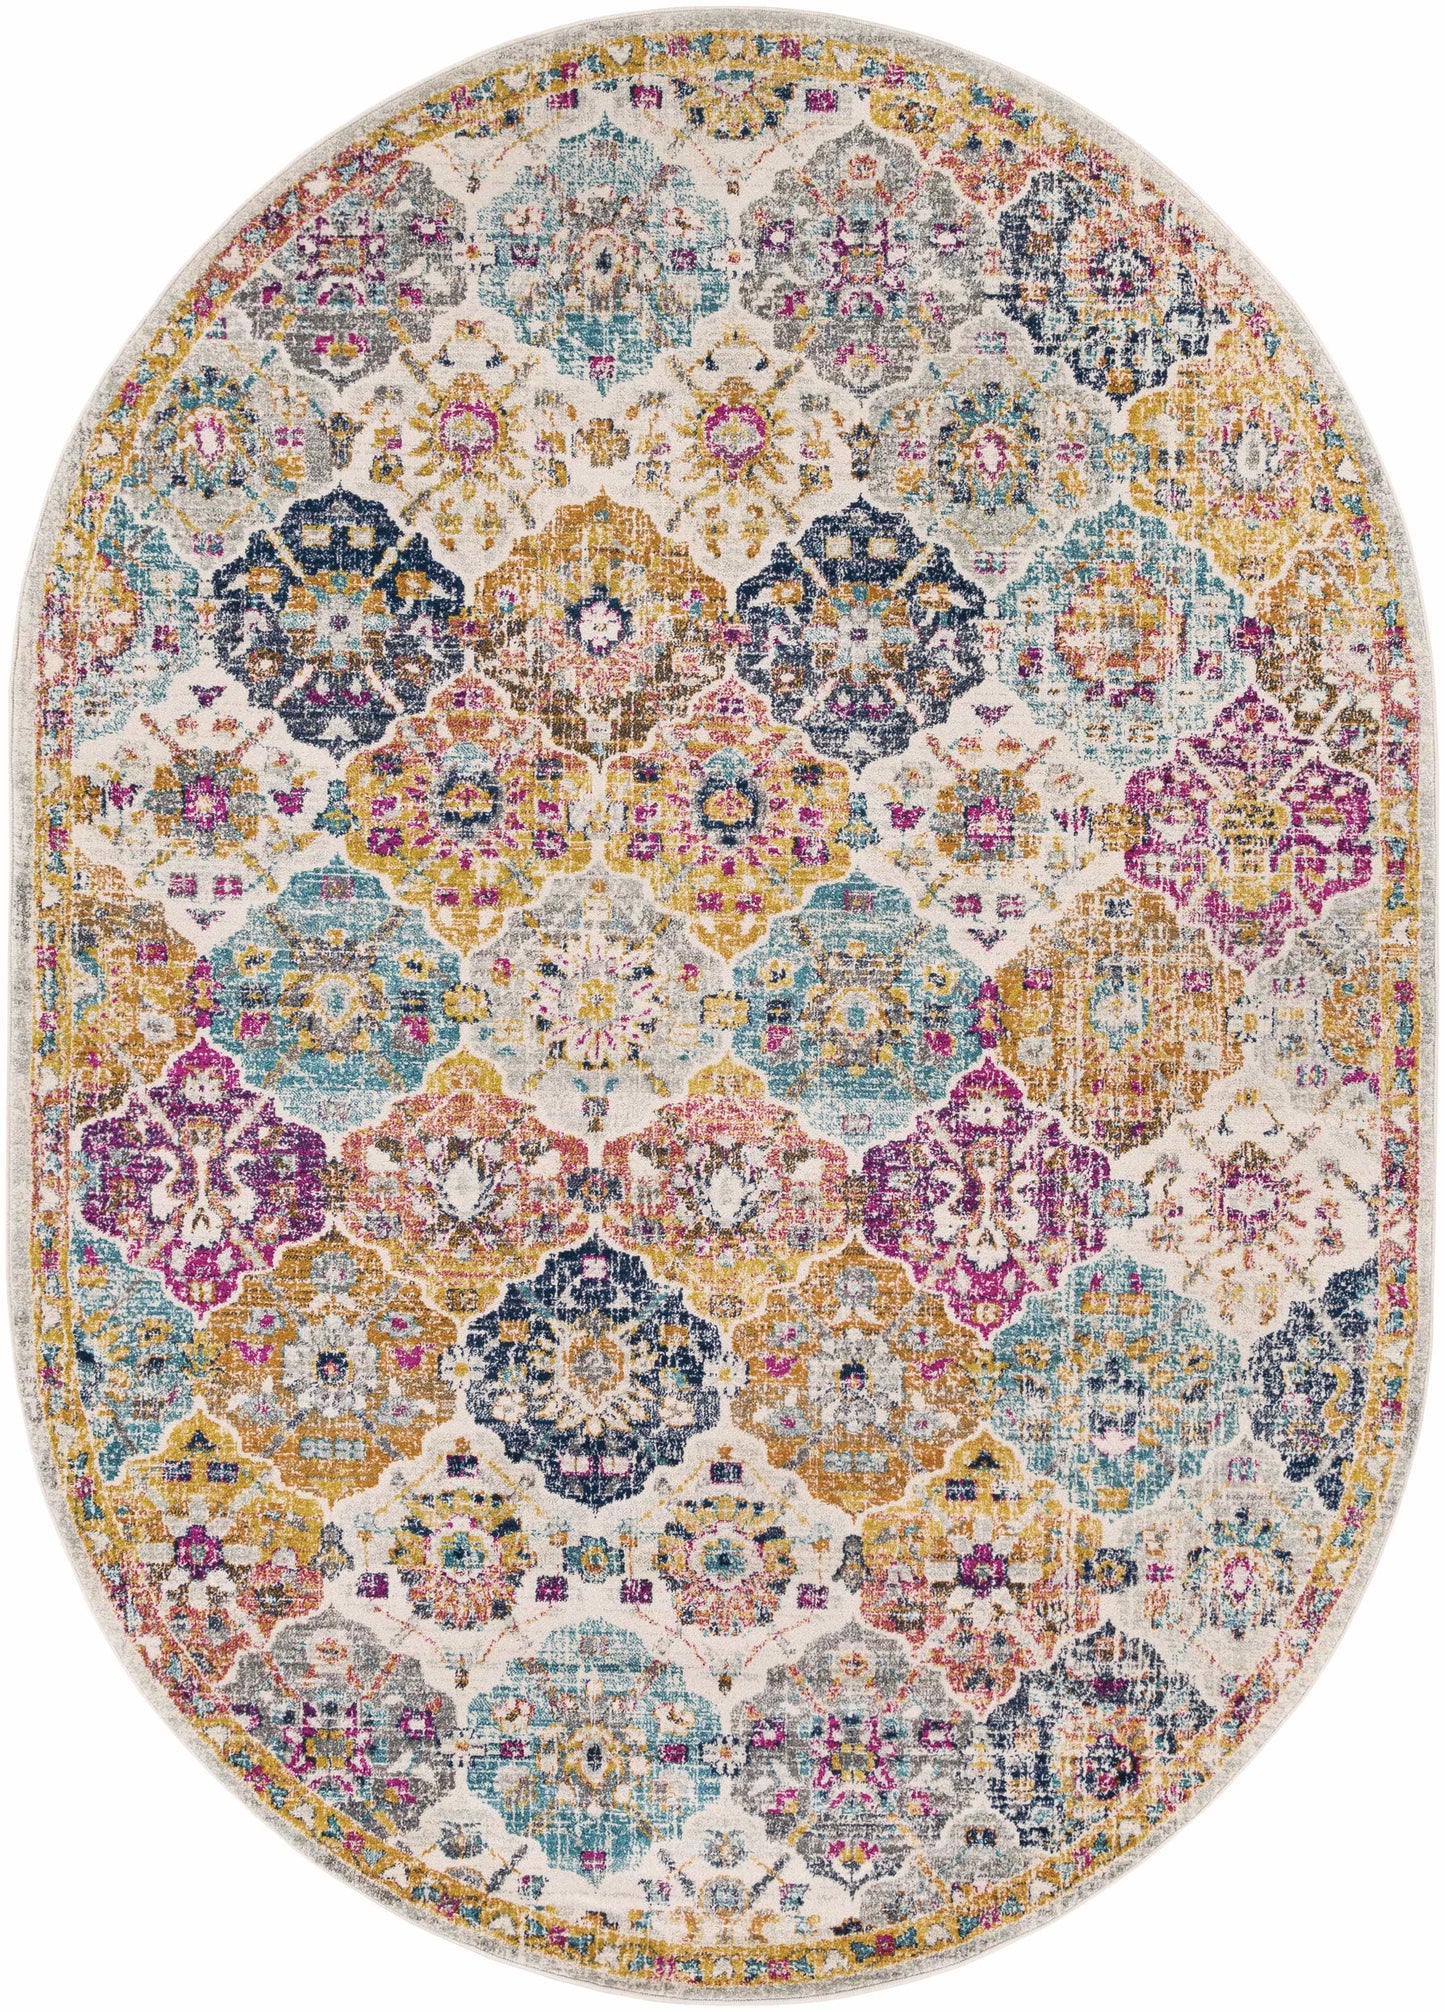 Boutique Rugs Rugs Custar Colorful Area Rug